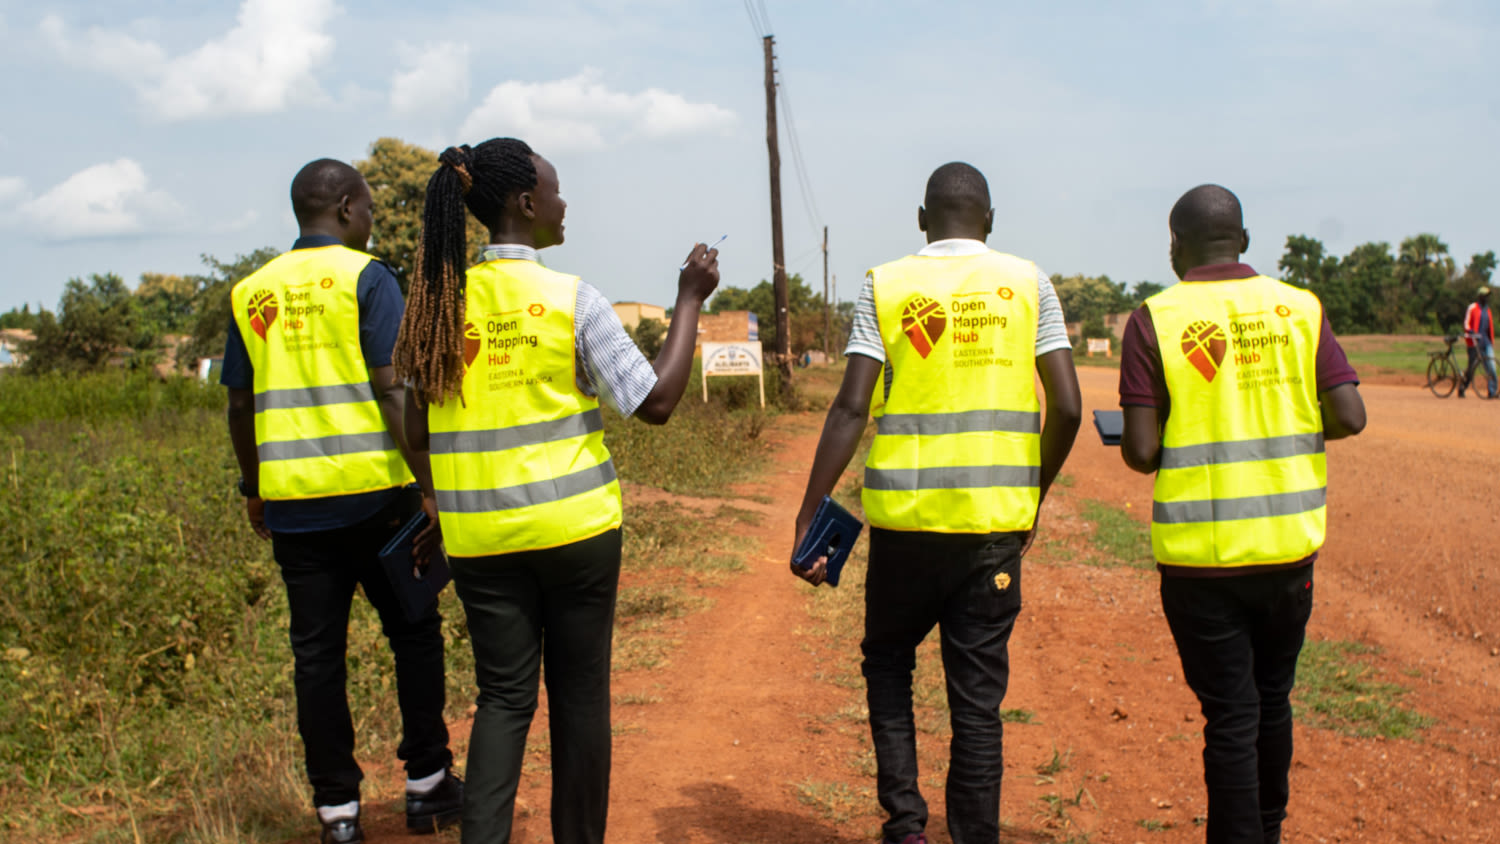 HOT volunteers working on the project to map contraceptive access sites for women in Uganda under the Ministry of Health and Amara Hub NGO project